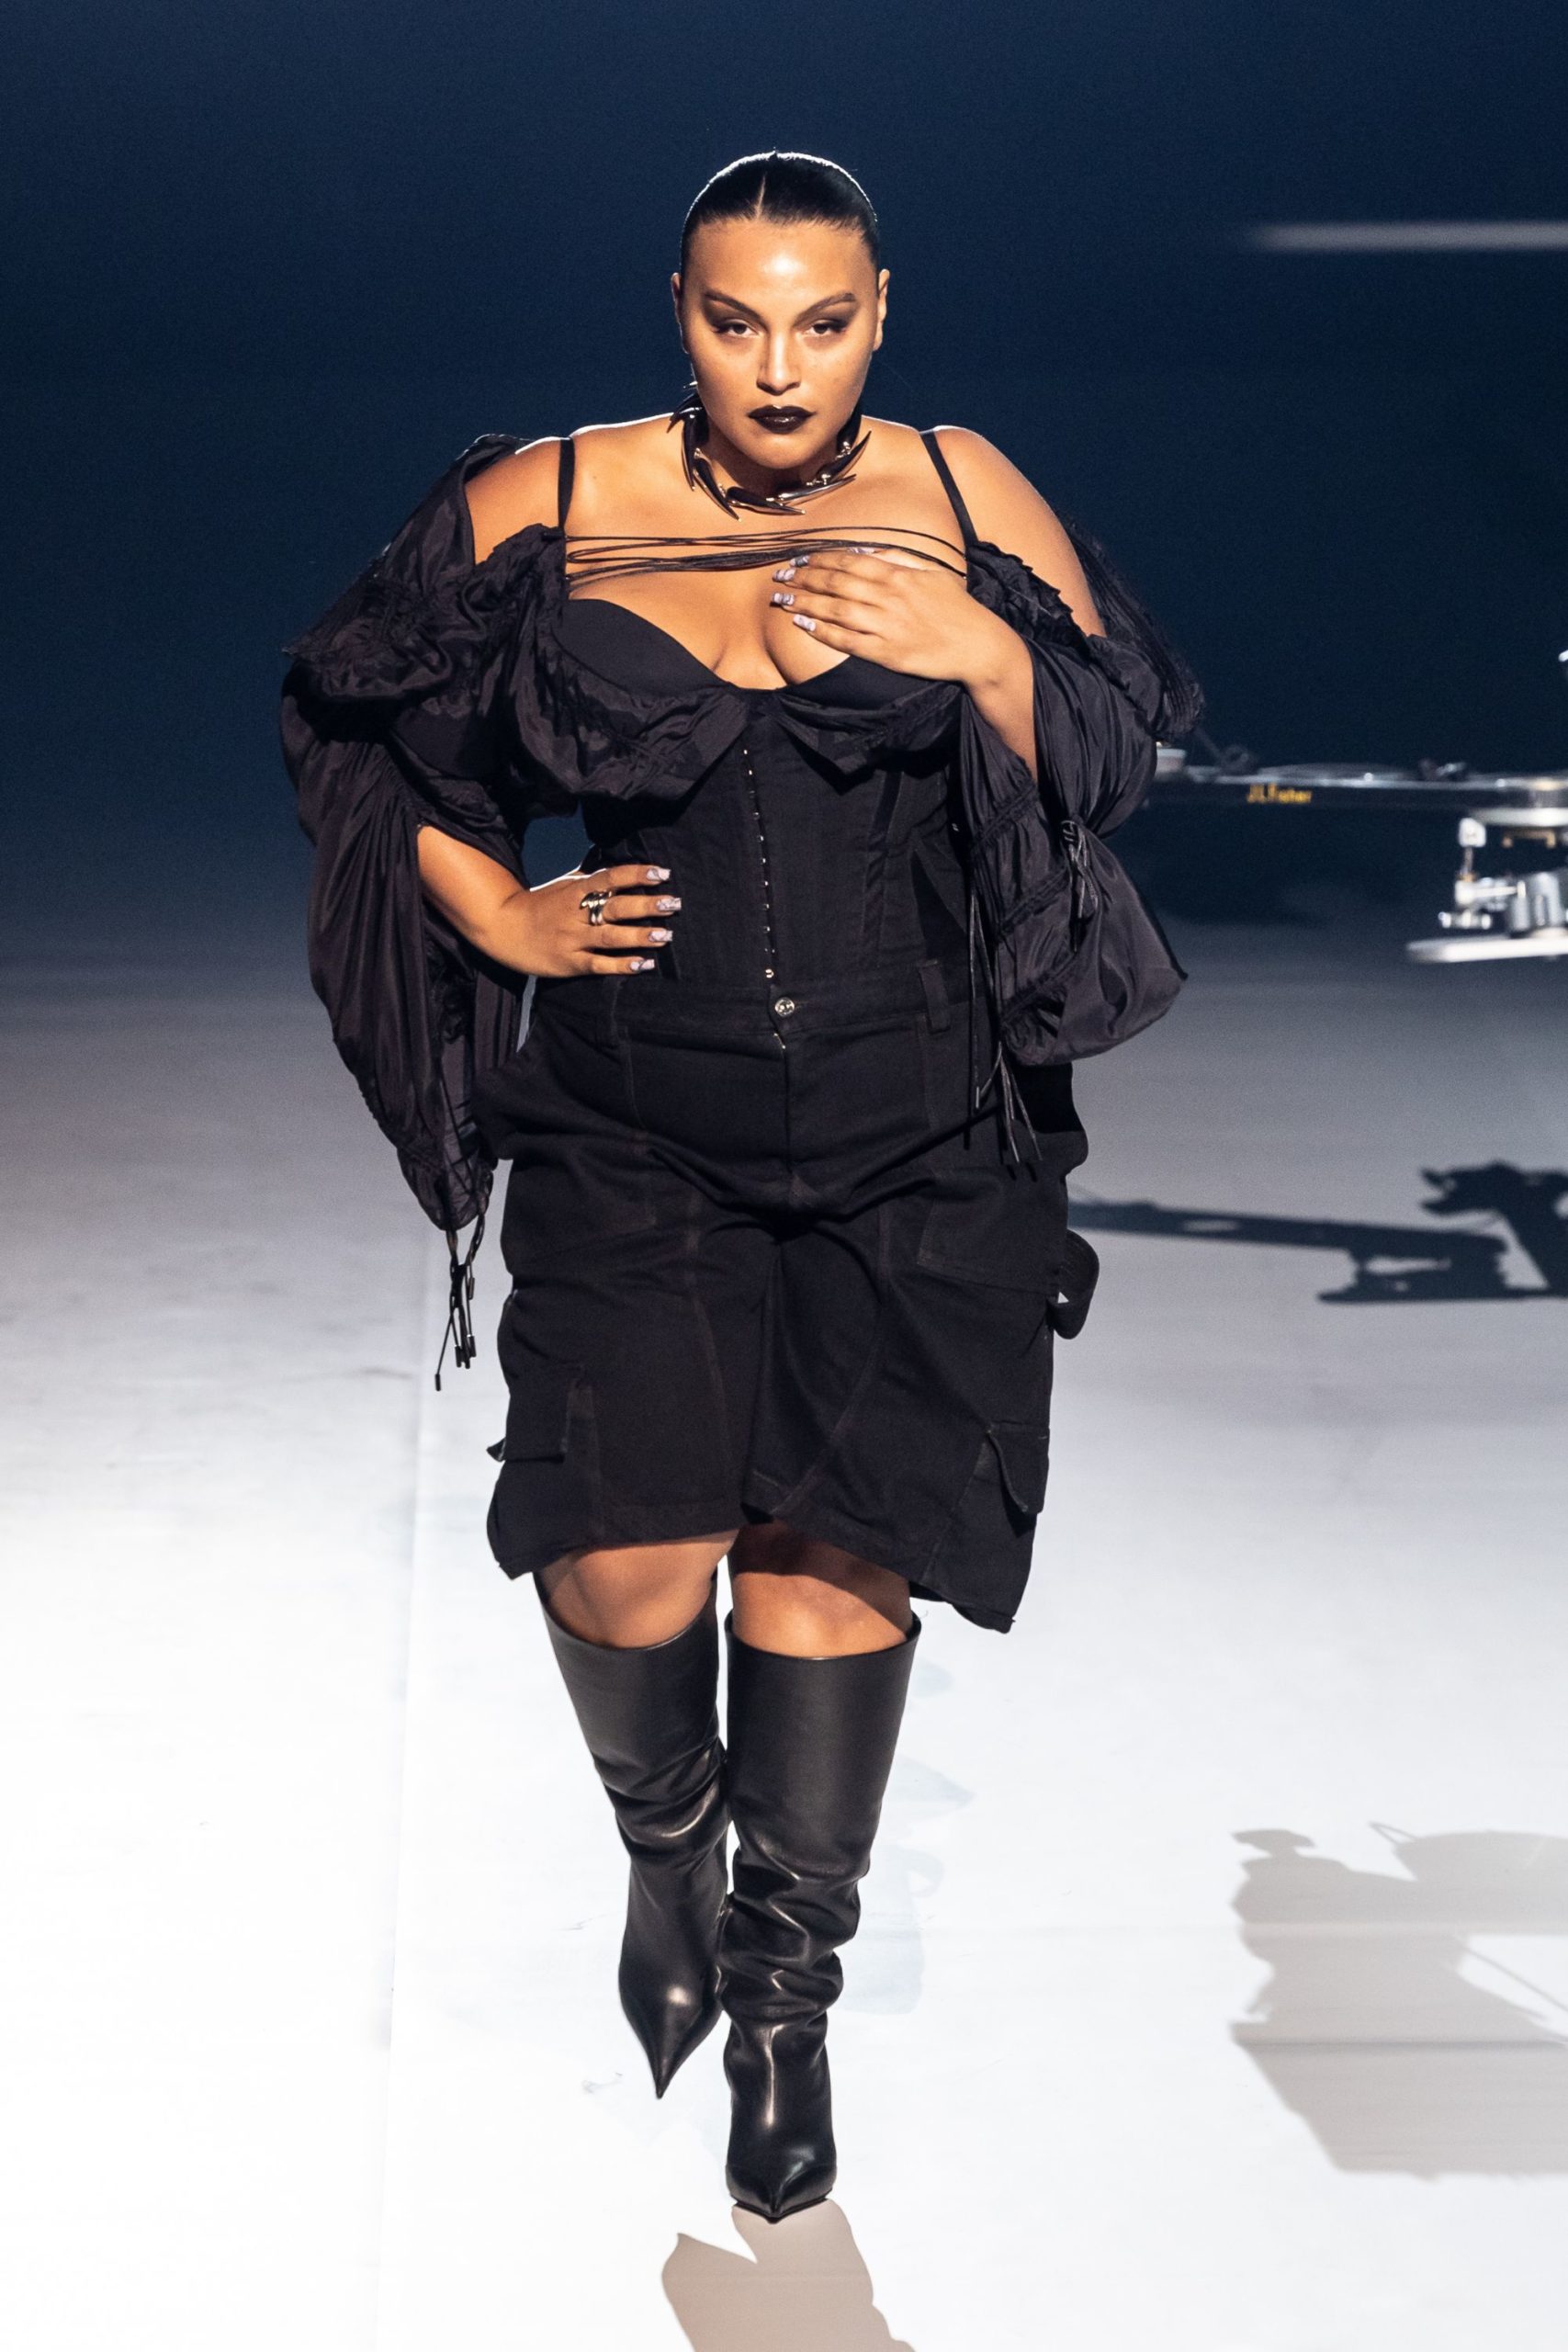 Size Inclusivity at Fashion Week Was Good, But It Could Be Better